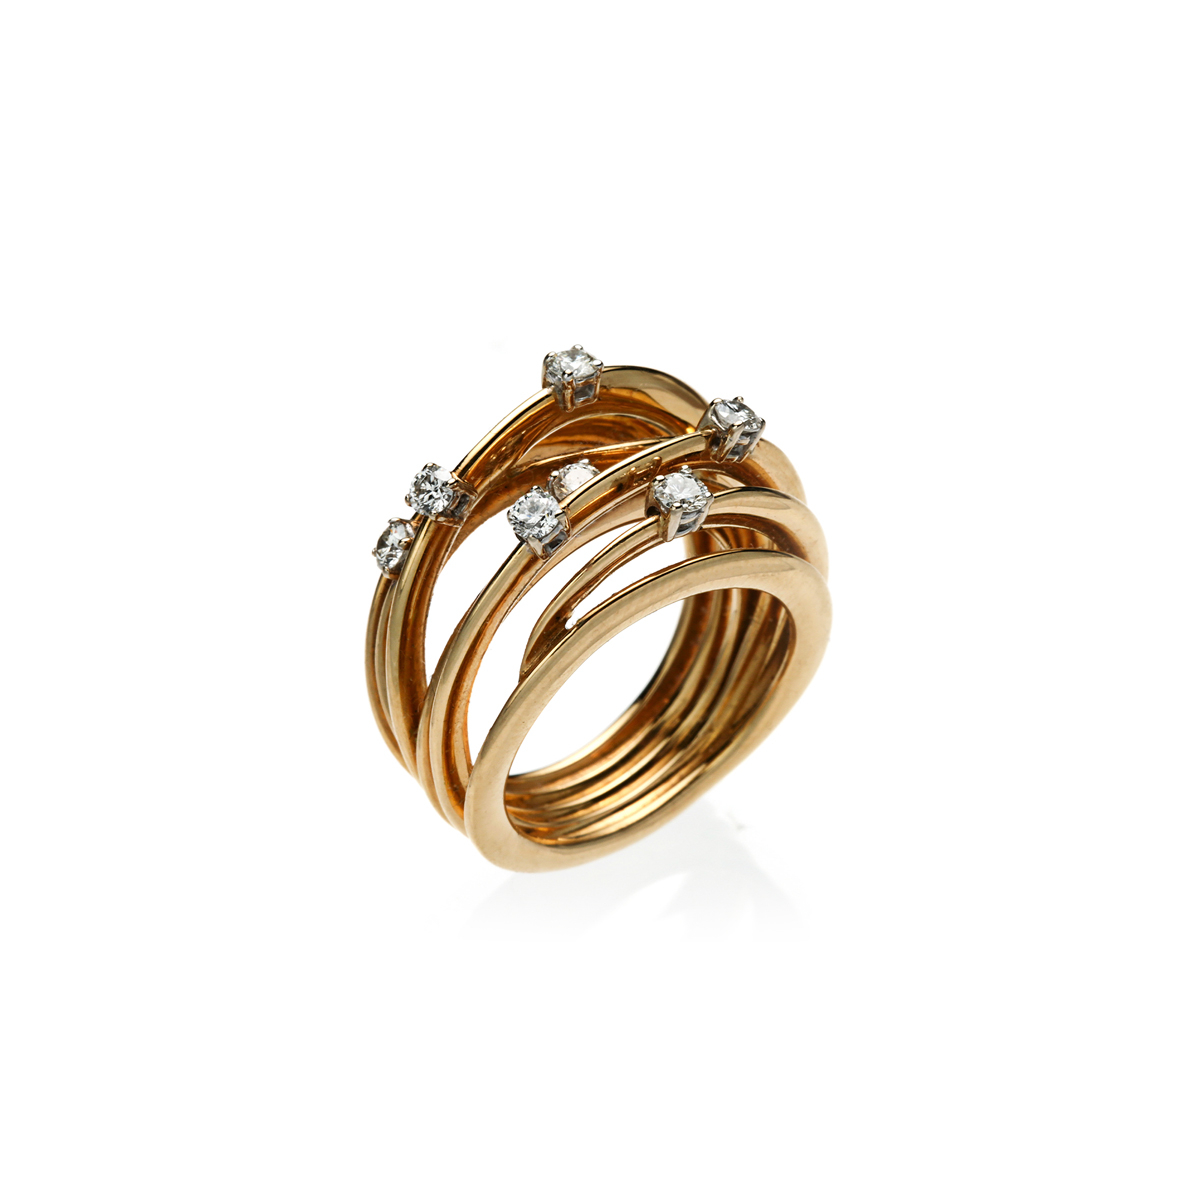 19 Kt Yellow Gold Multi-Band Ring with Diamonds